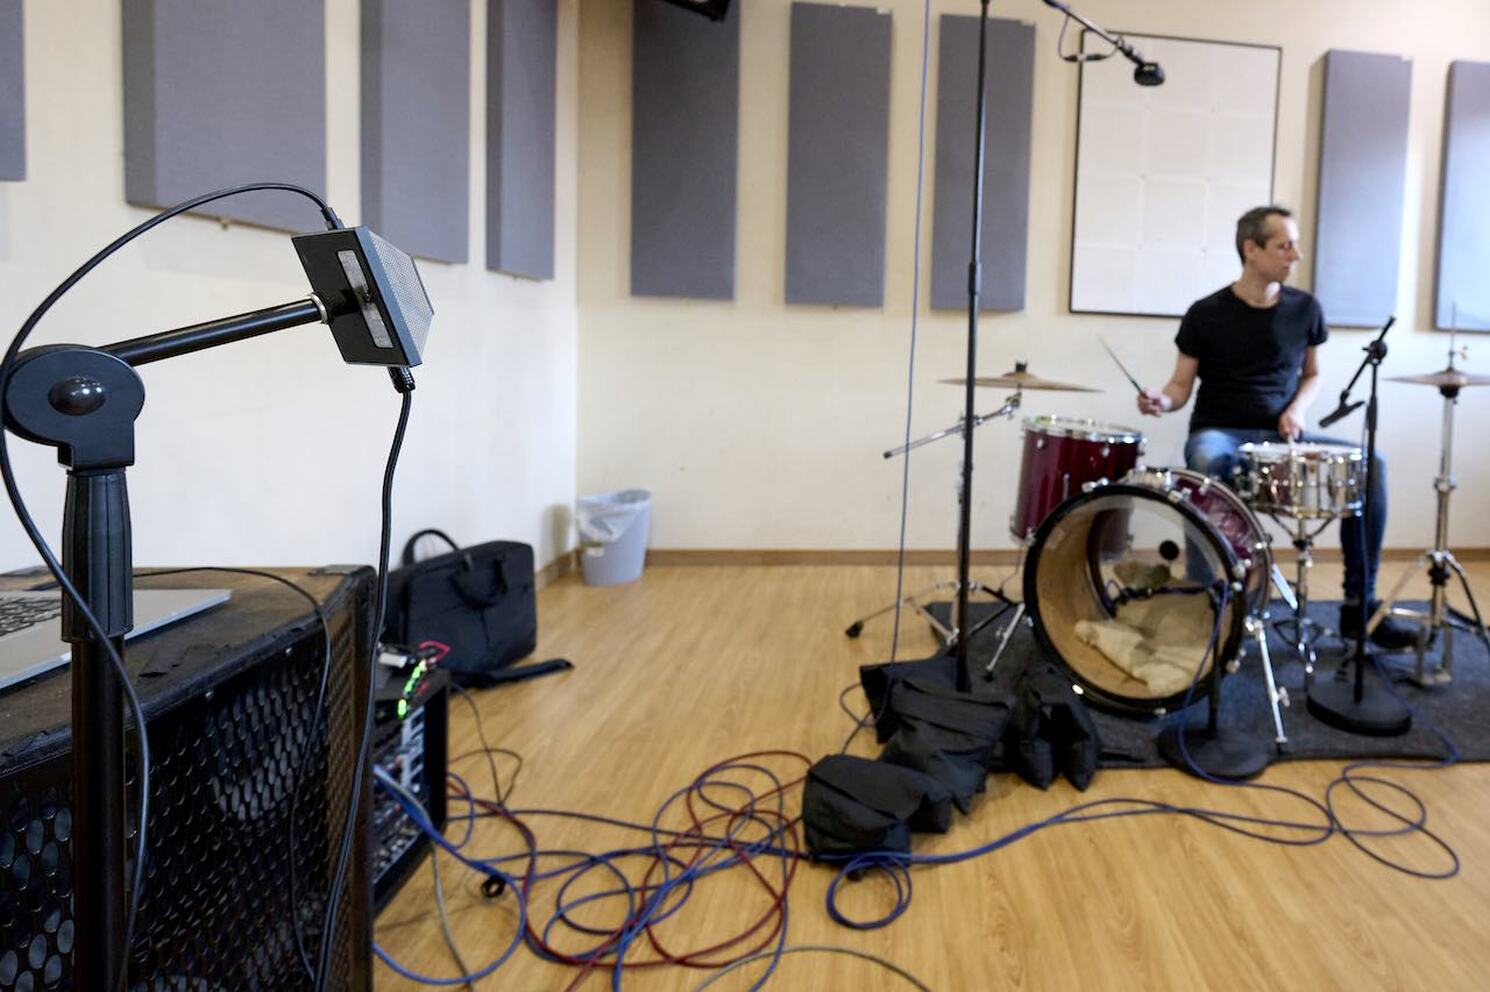 drum recording with an SSL USB Connex microphone in a rehearsal room